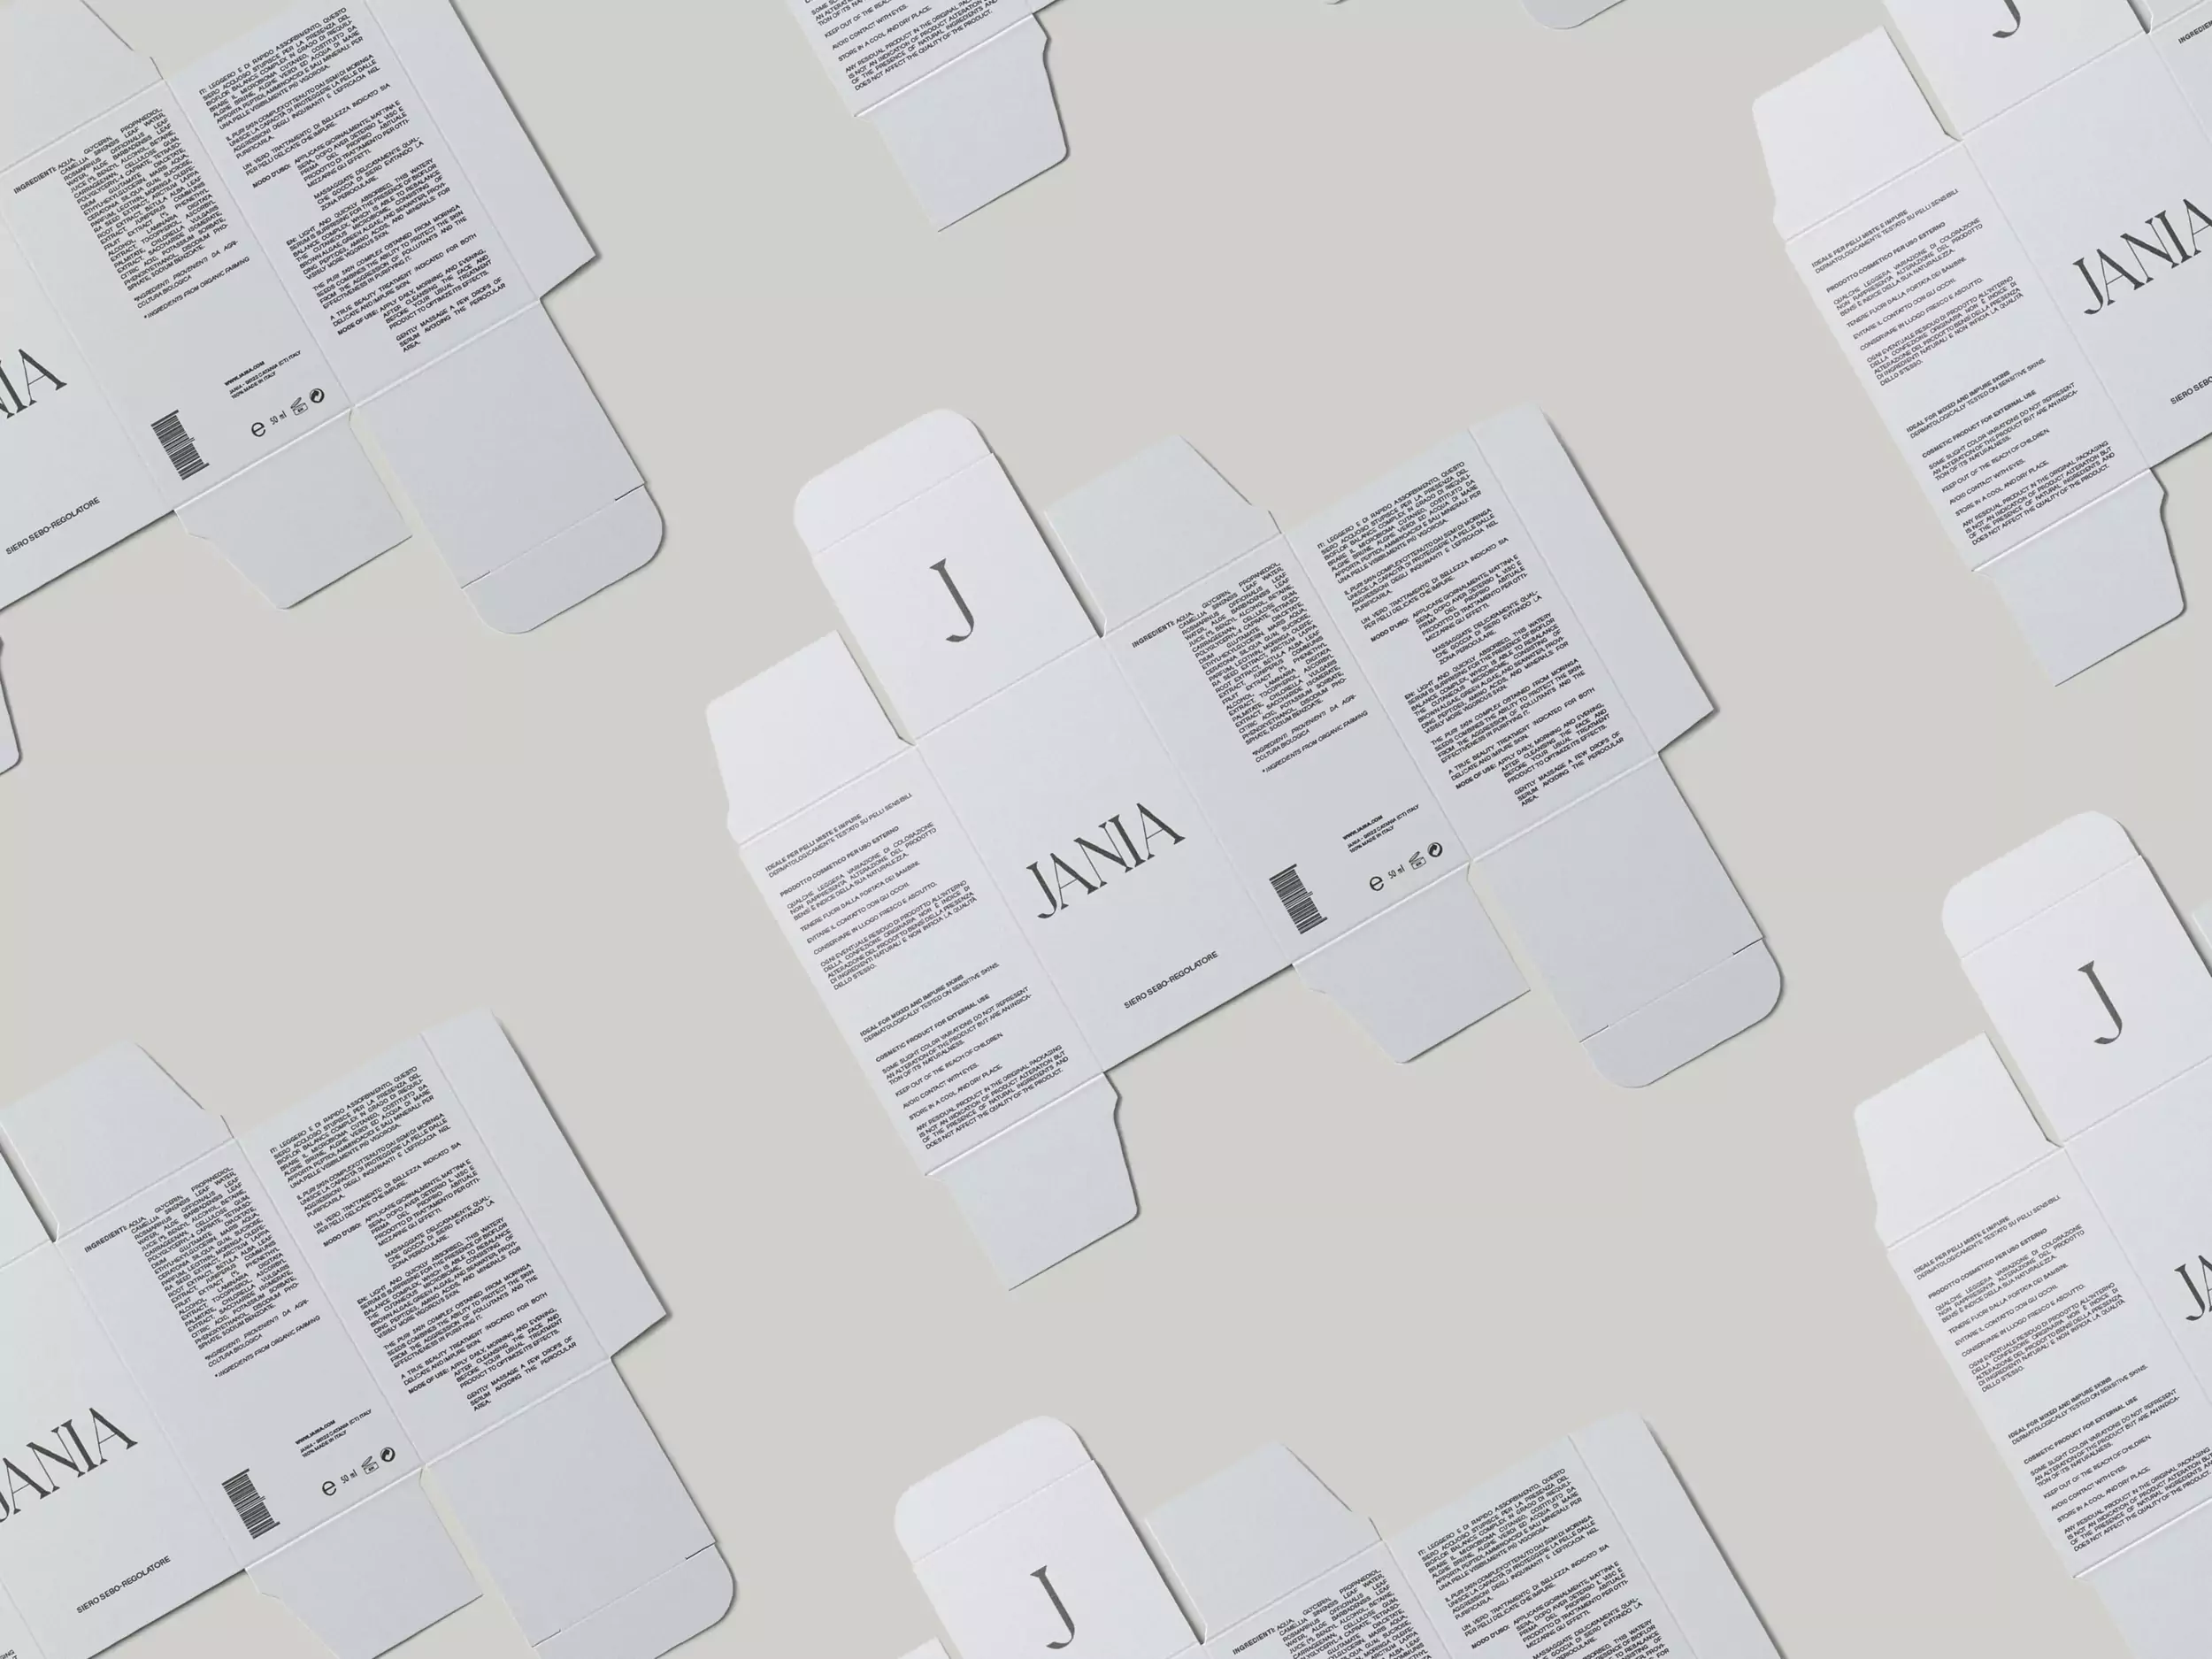 Brand Identity for Jania - Packaging Design